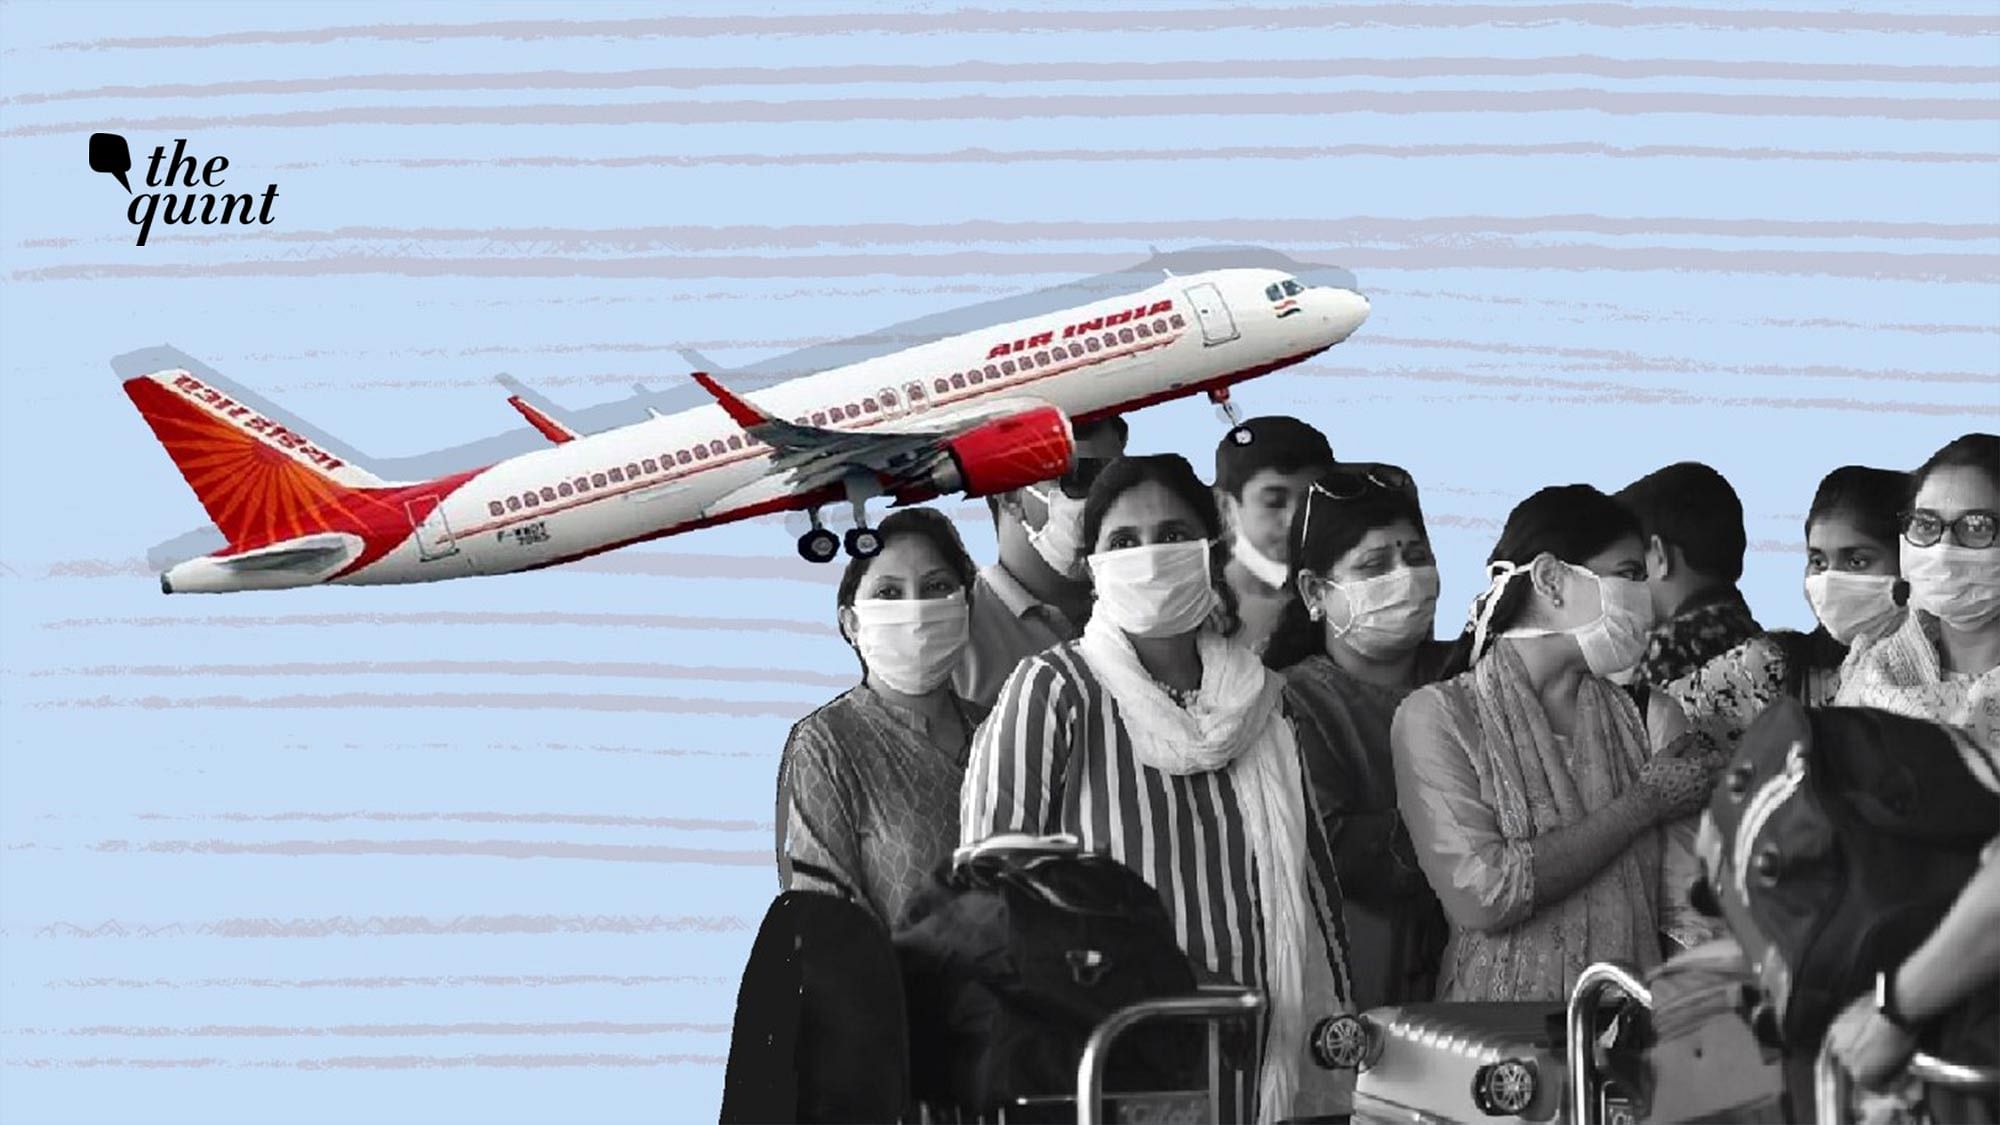 Delhi Chief Minister Arvind Kejriwal on Thursday asked the Centre to extend the flight ban till 31 January, owing to the ‘extremely serious’ COVID-19 situation in the UK. 